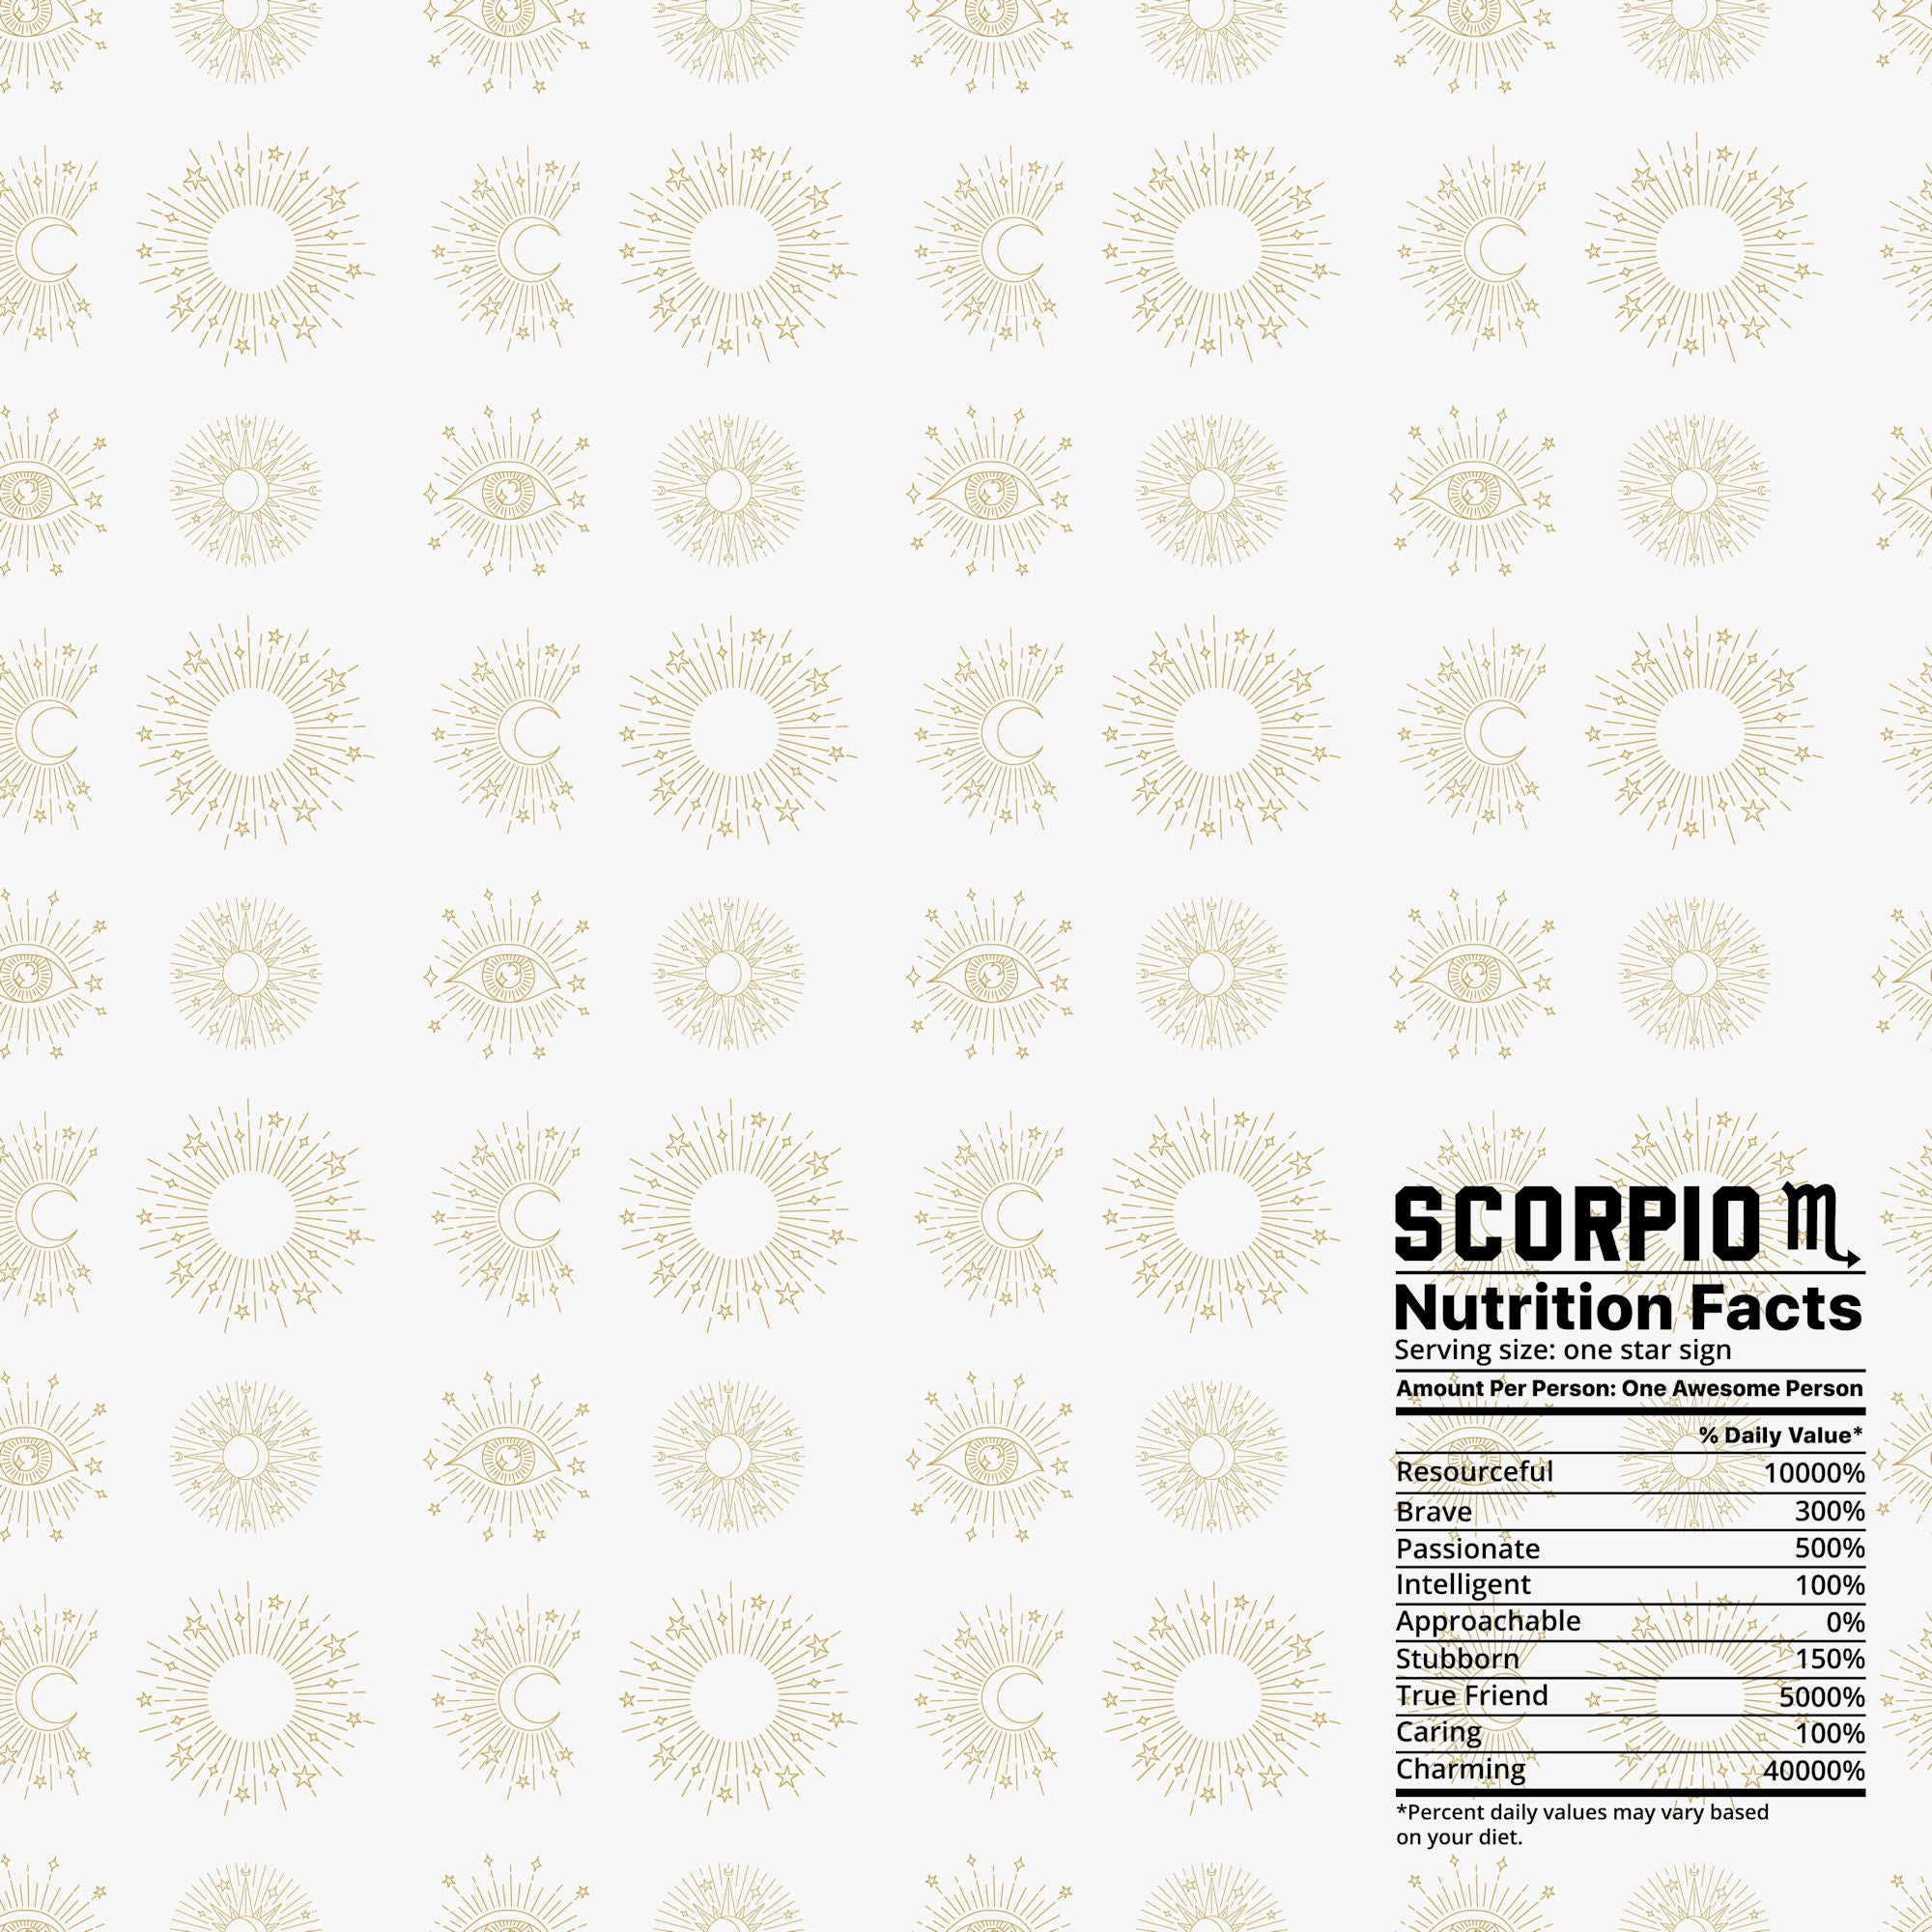 Astrology Collection Scorpio 12 x 12 Double-Sided Scrapbook Paper by SSC Designs